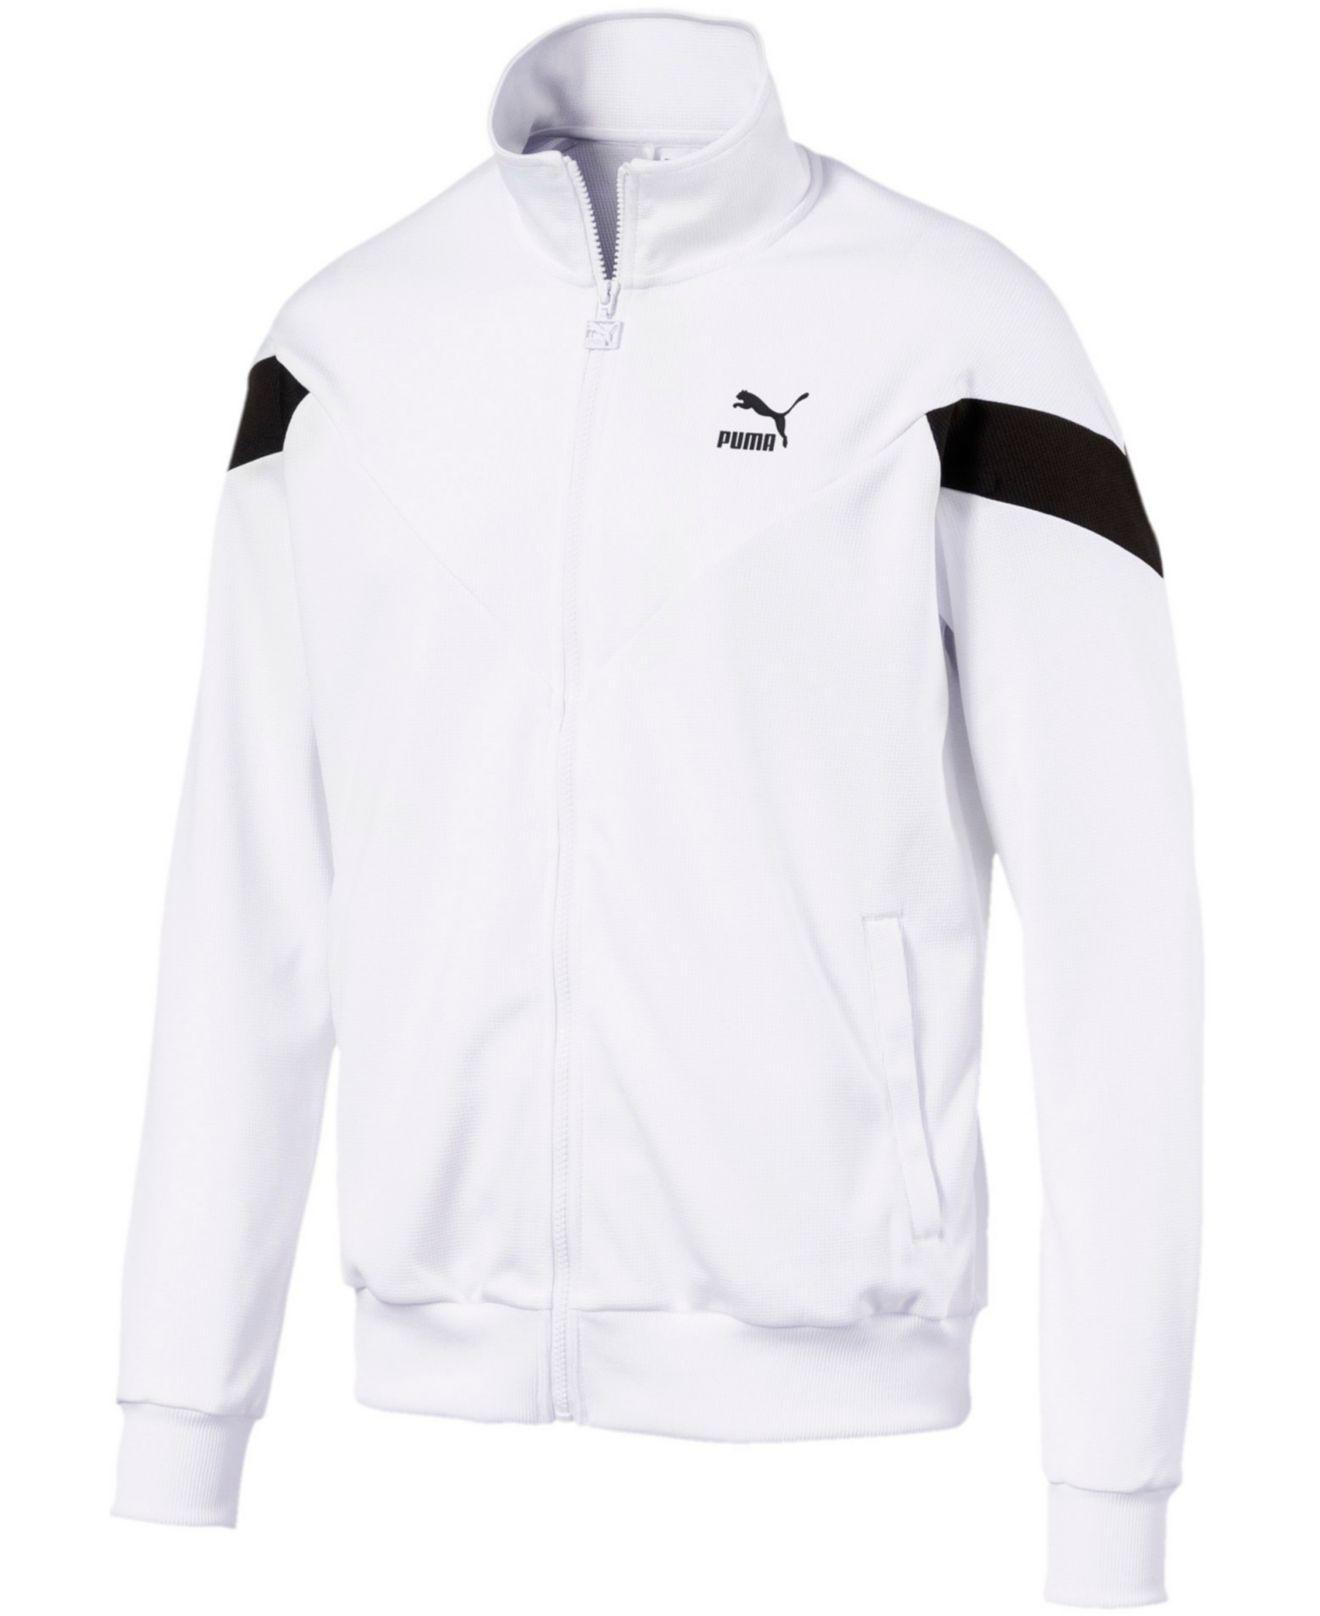 Sale > puma jacket black and white > in stock